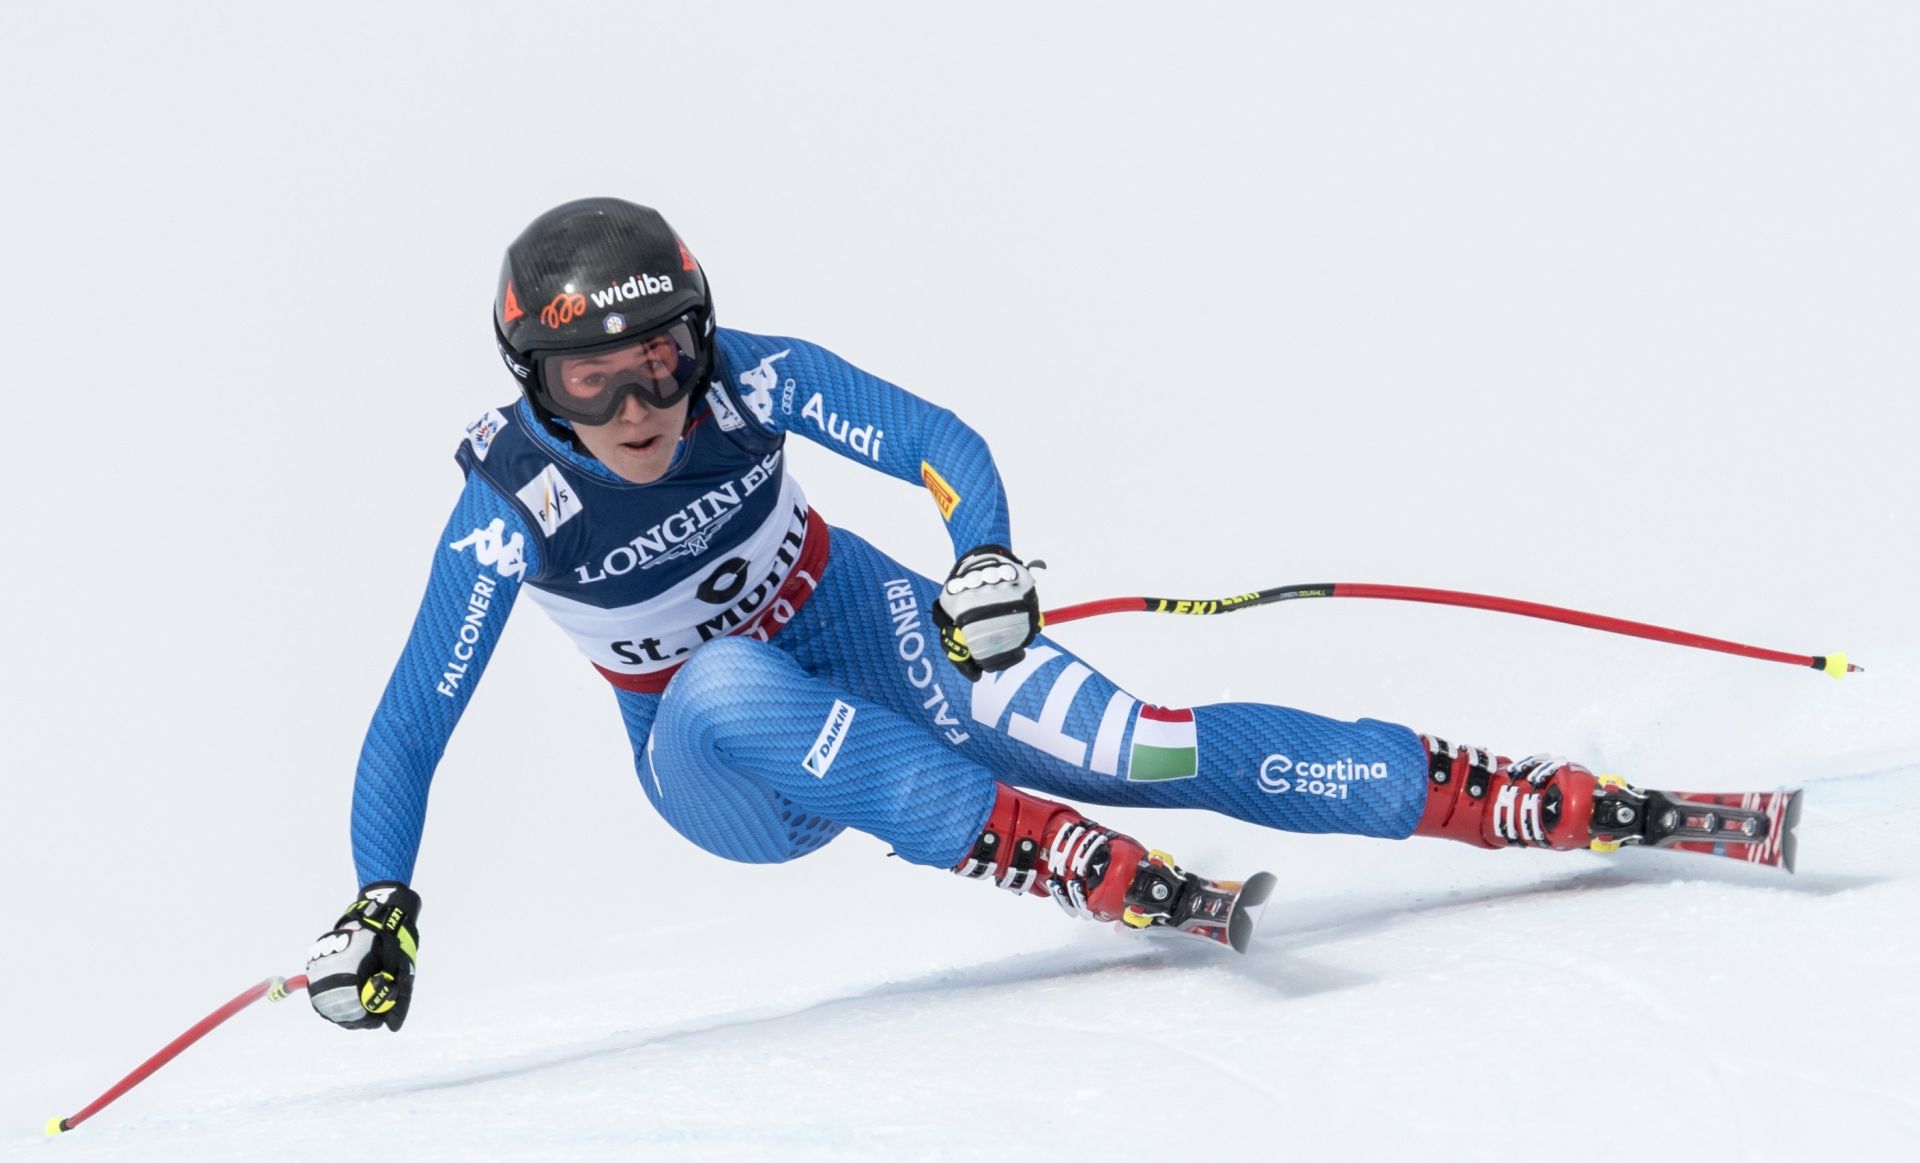 epa05782217 Sofia Goggia of Italy during the womens alpine combined downhill race at the 2017 FIS Alpine Skiing World Championships in St. Moritz, Switzerland, 10 February 2017.  EPA/GIAN EHRENZELLER